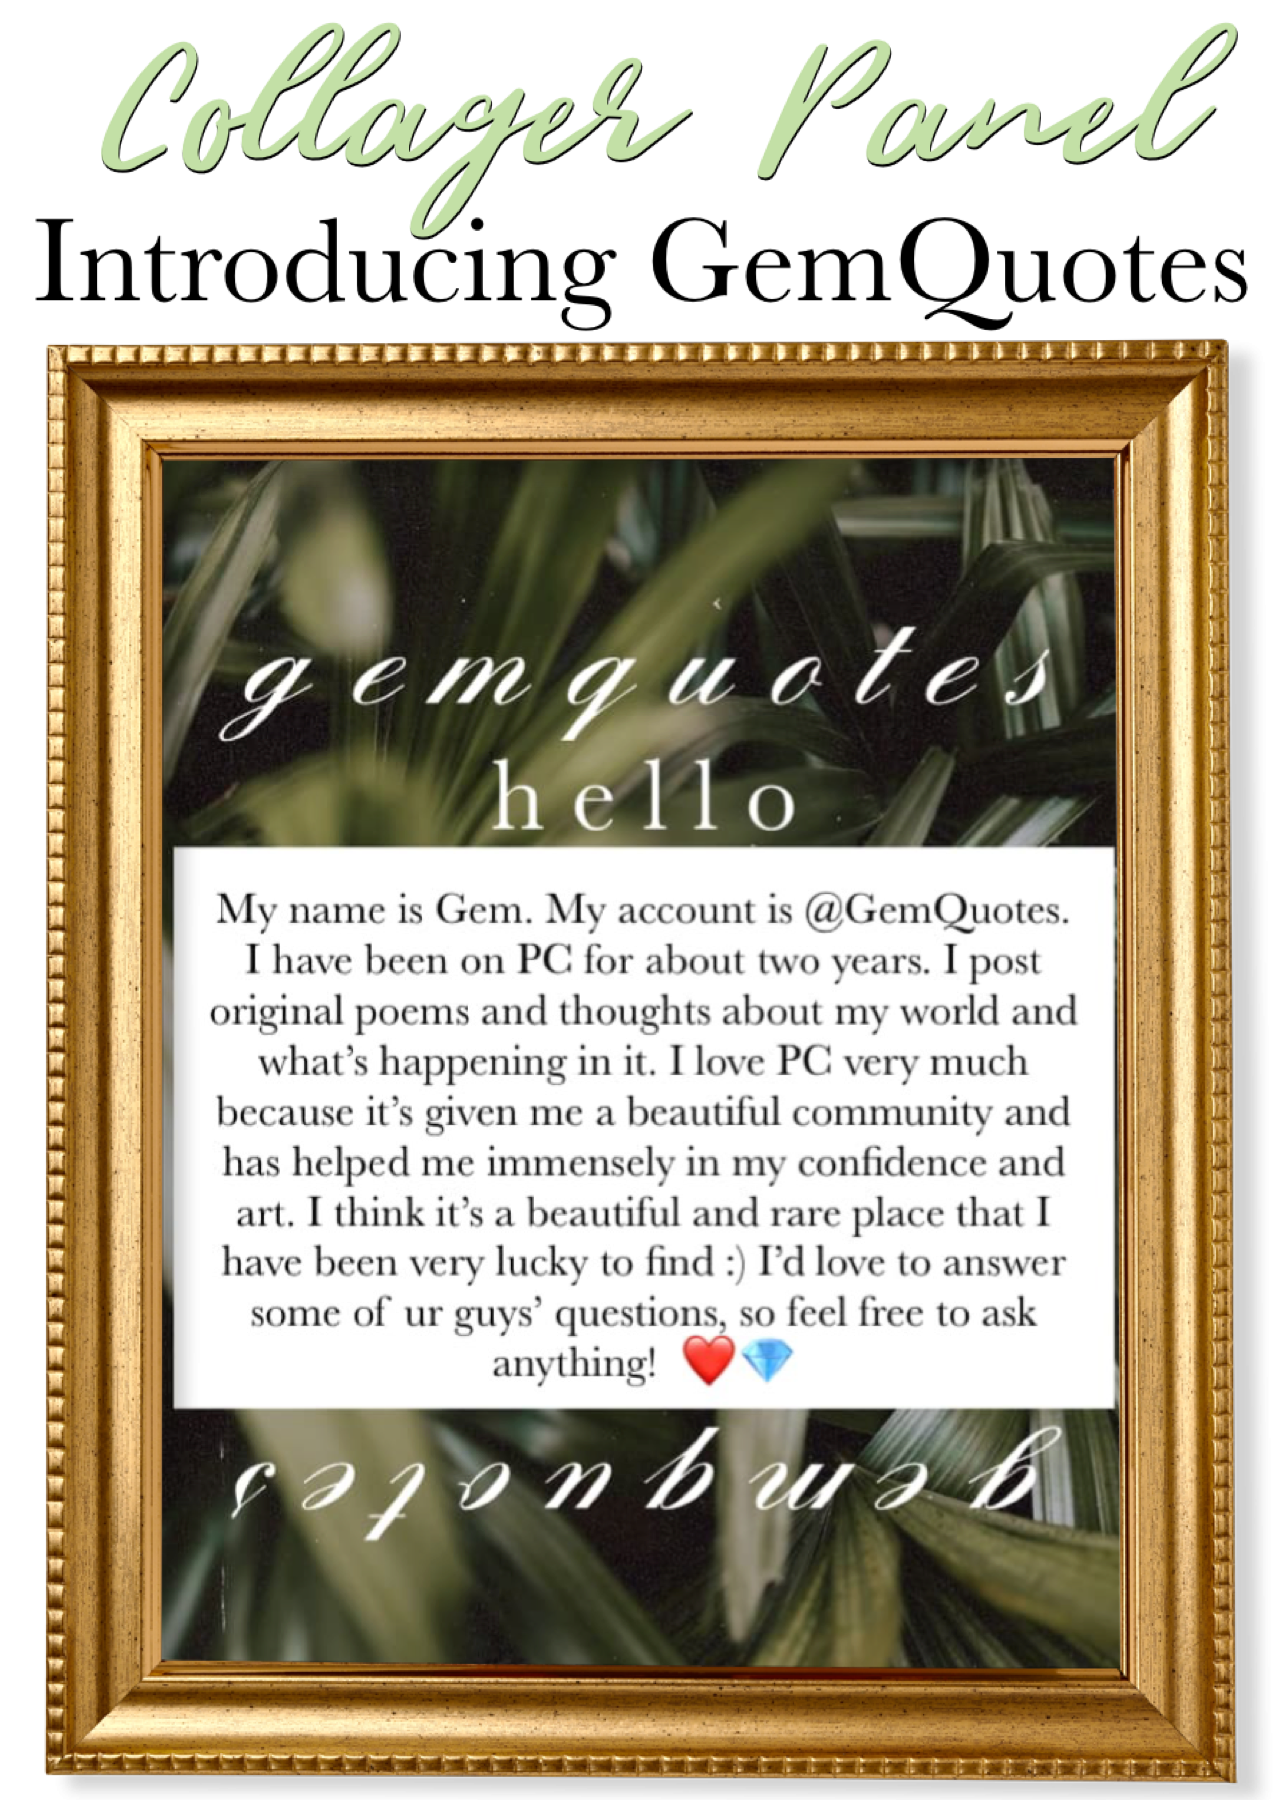 Introducing GemQuotes! Welcome to the Panel!